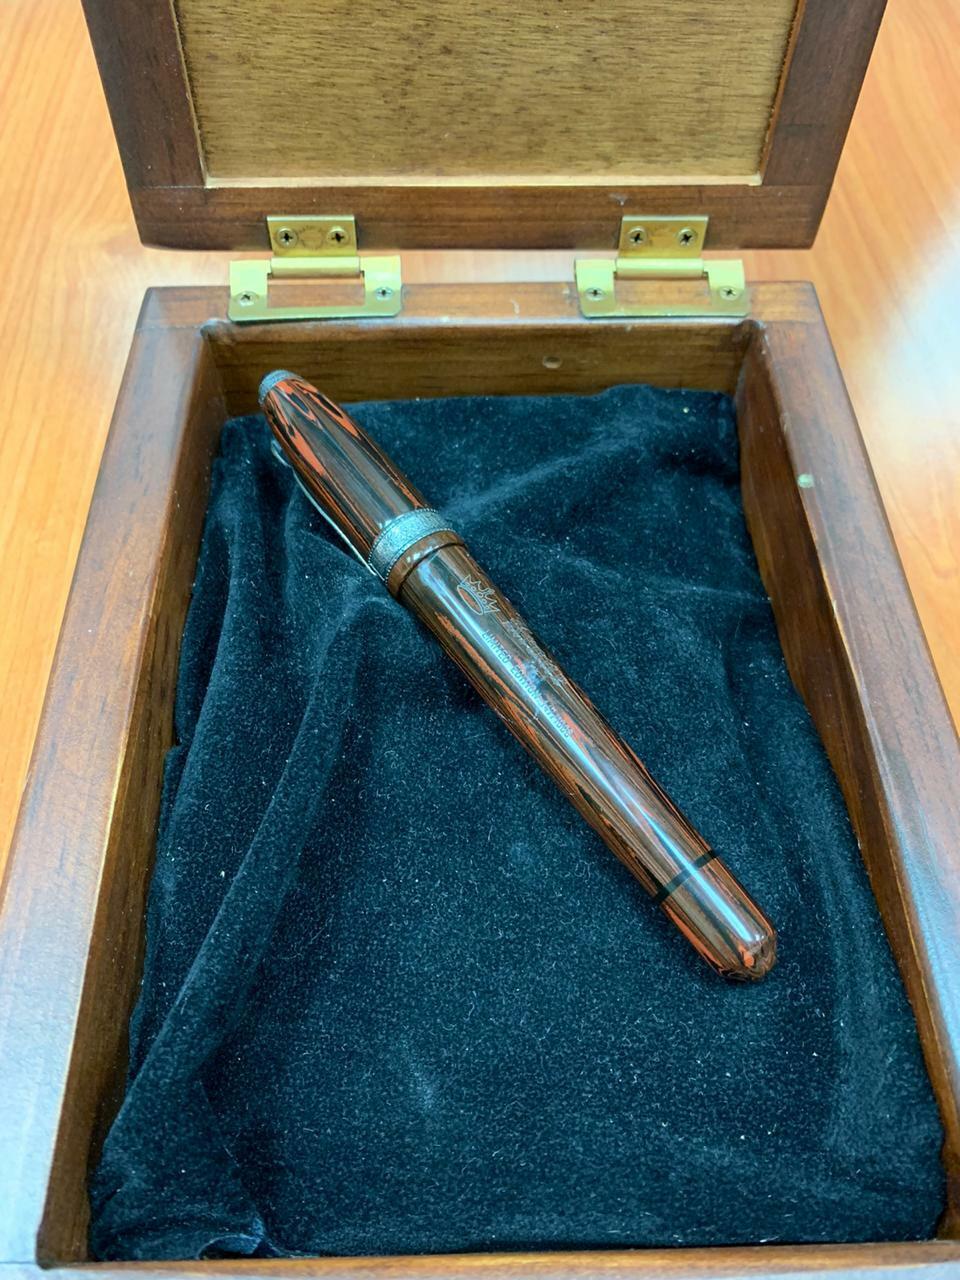 Krone Abraham Lincoln DNA Limited Edition Fountain Pen with amethyst on the top.